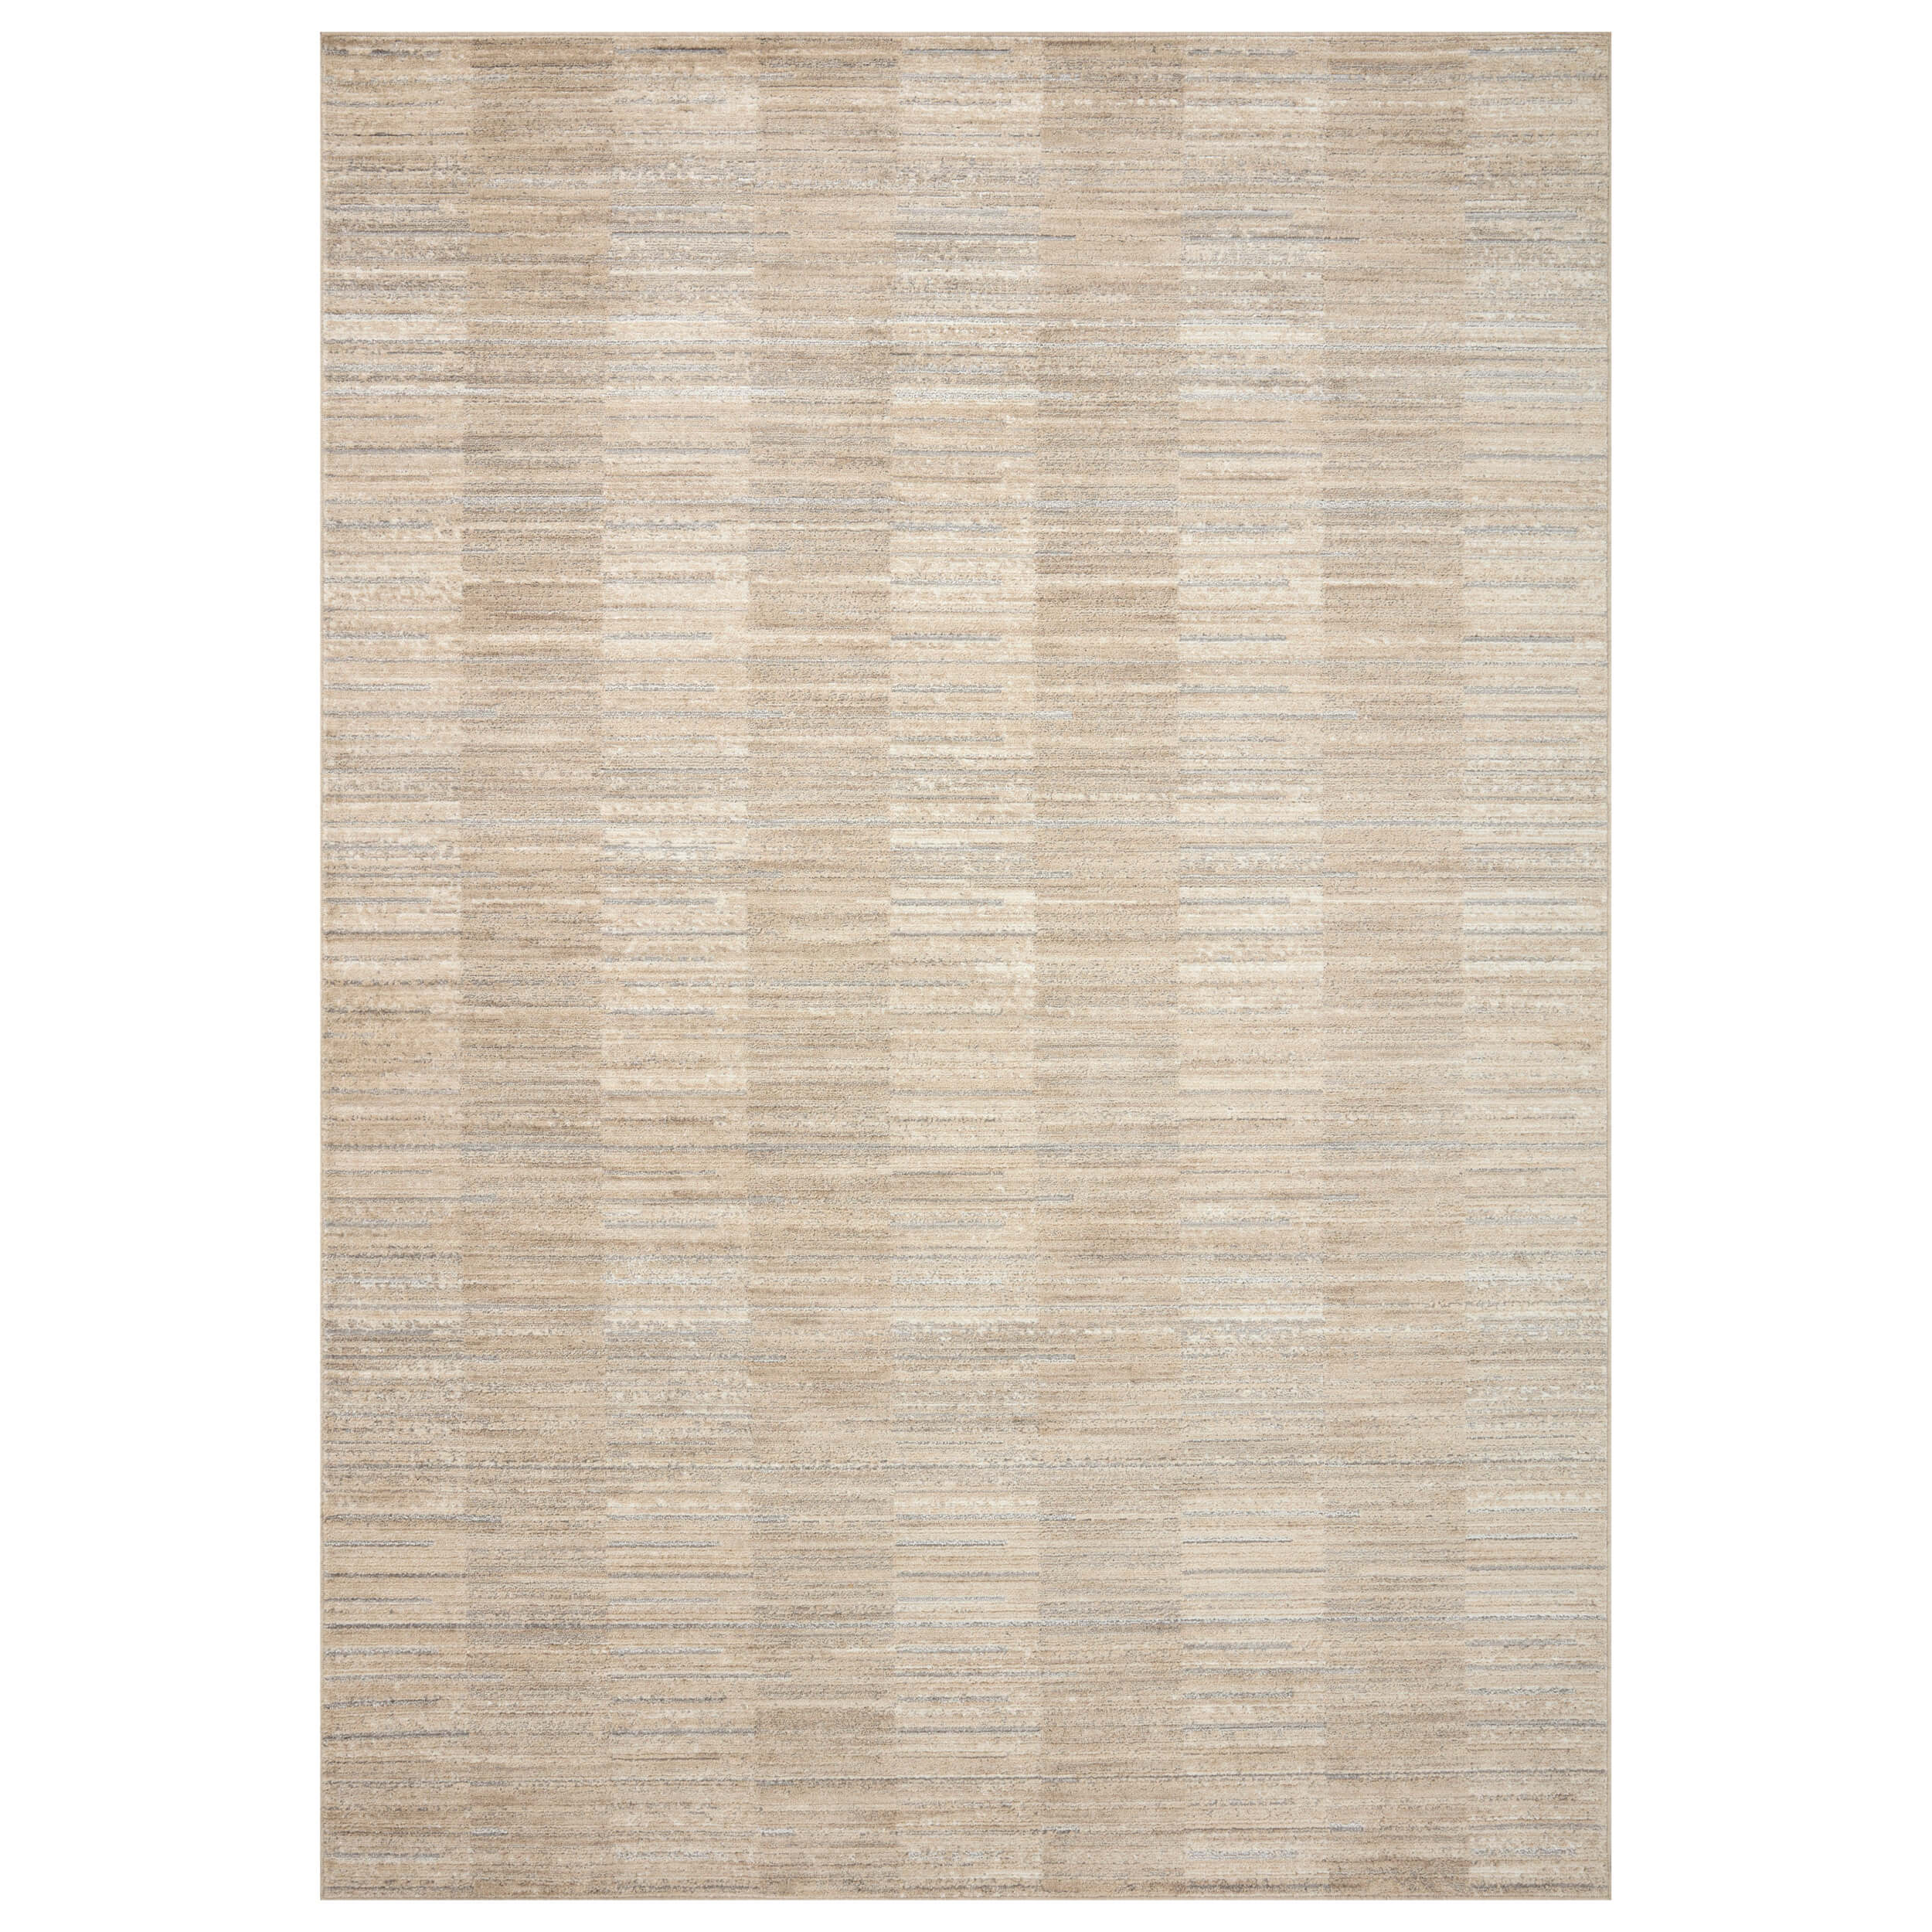 Image of Loloi II Rug Arden ARD-01, Natural/Pebble